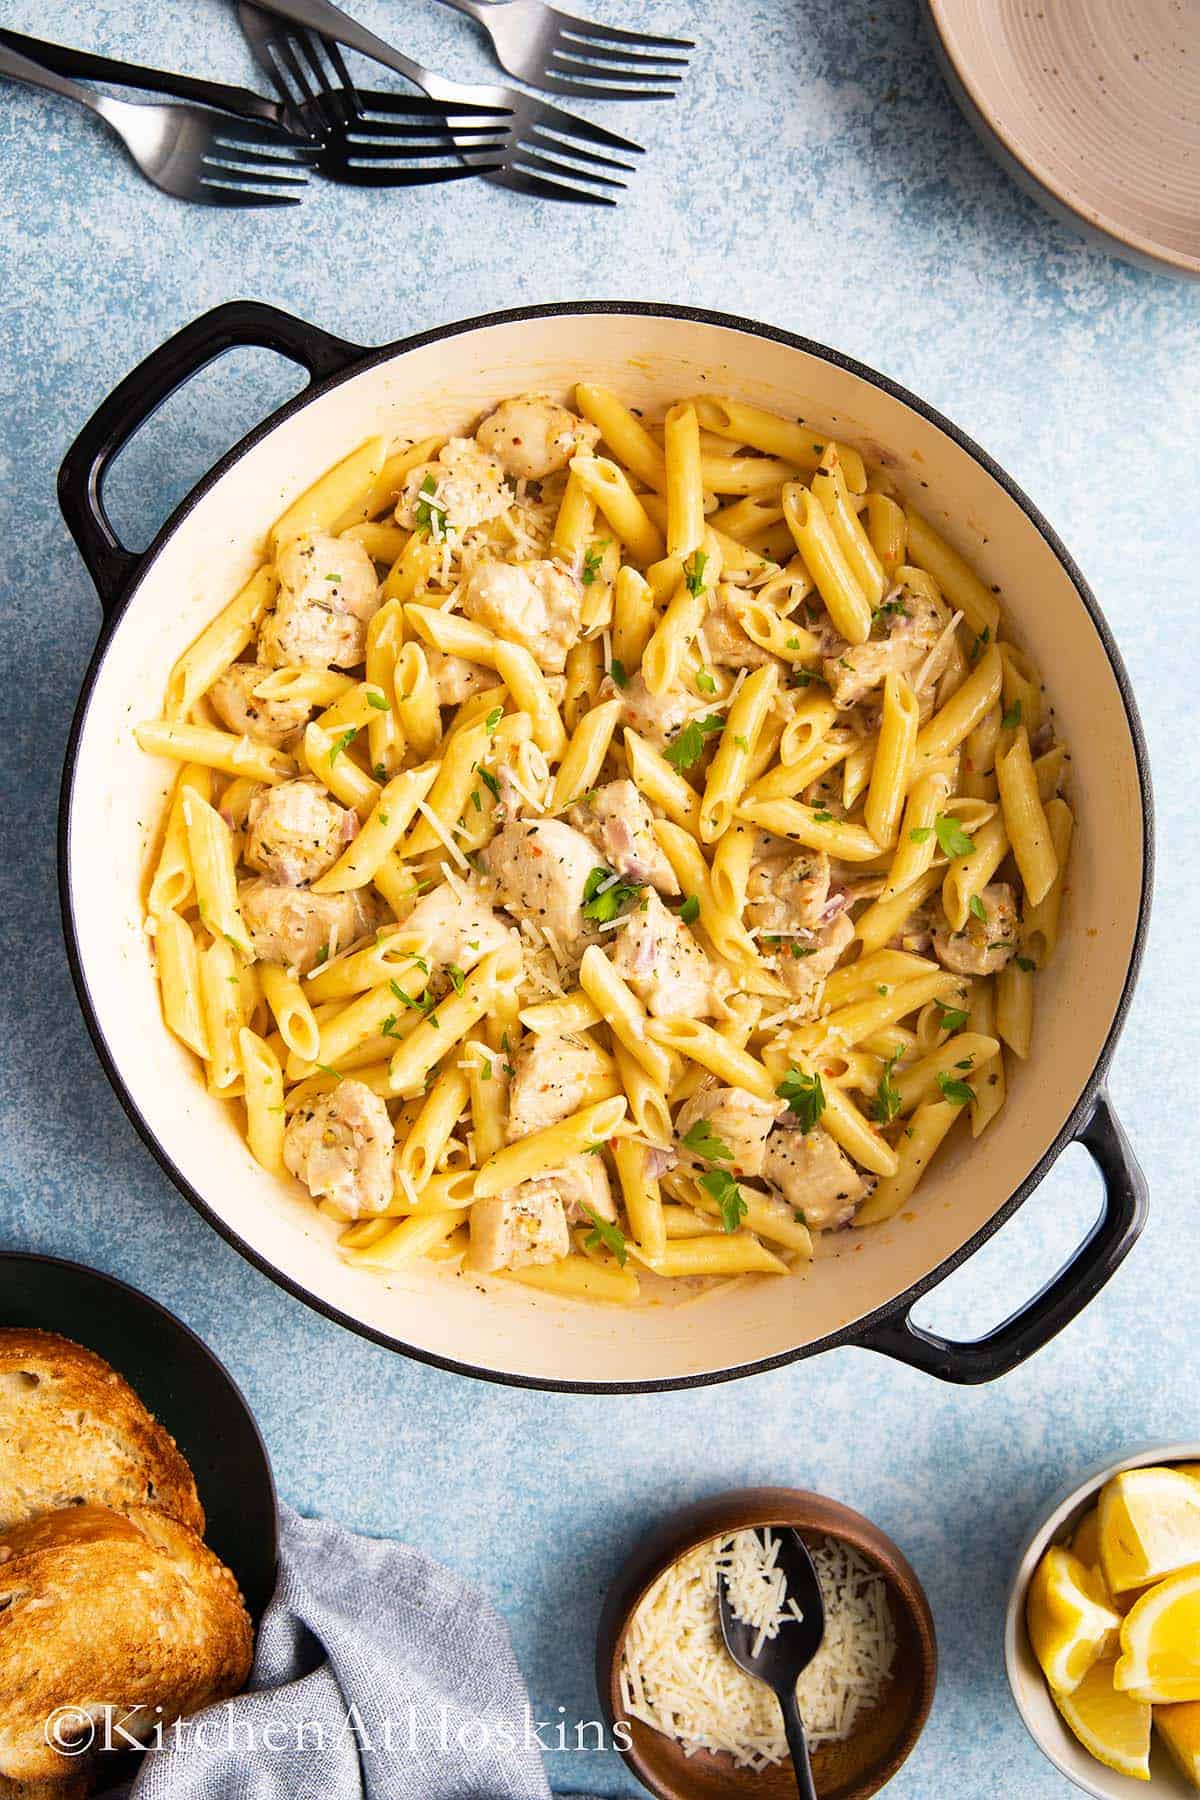 cast iron pan with creamy lemon chicken pasta garnished with parsley.